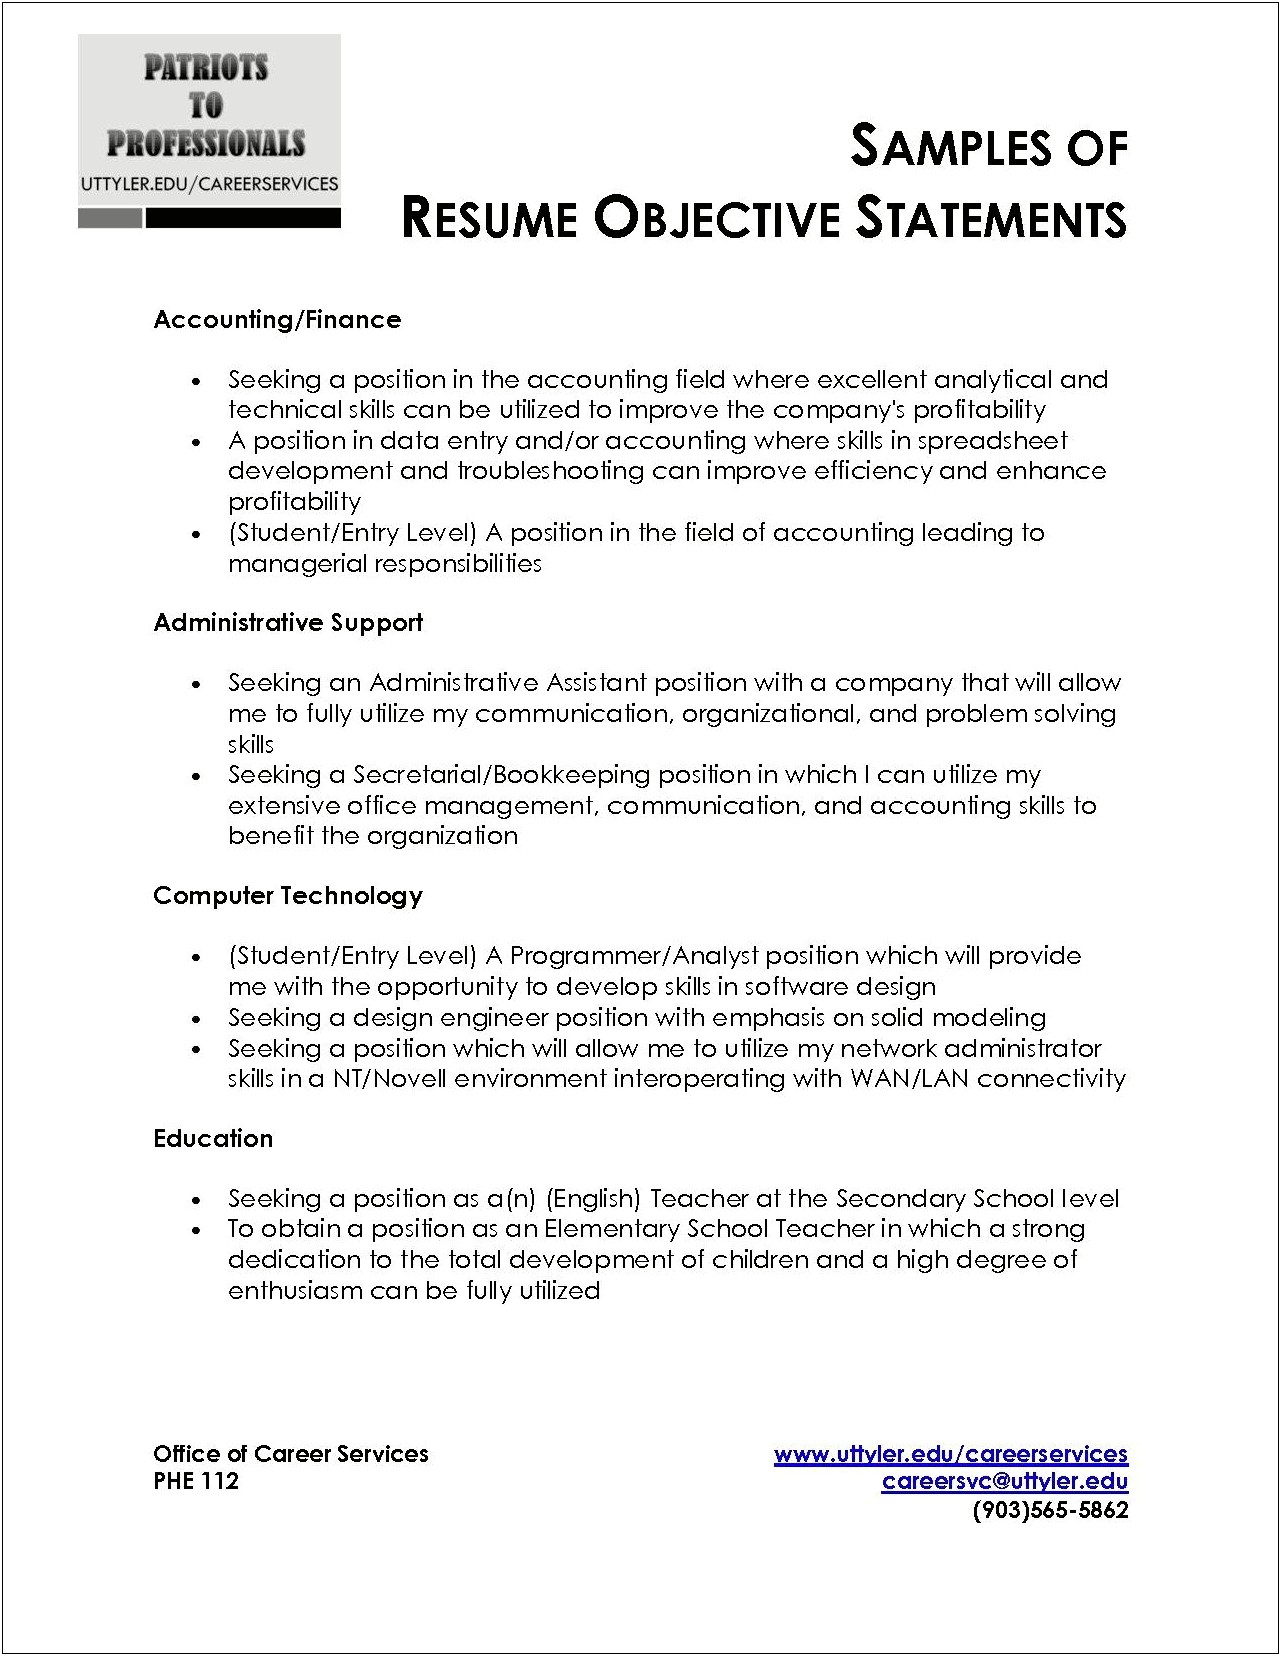 A Good Objective Statement For A General Resume